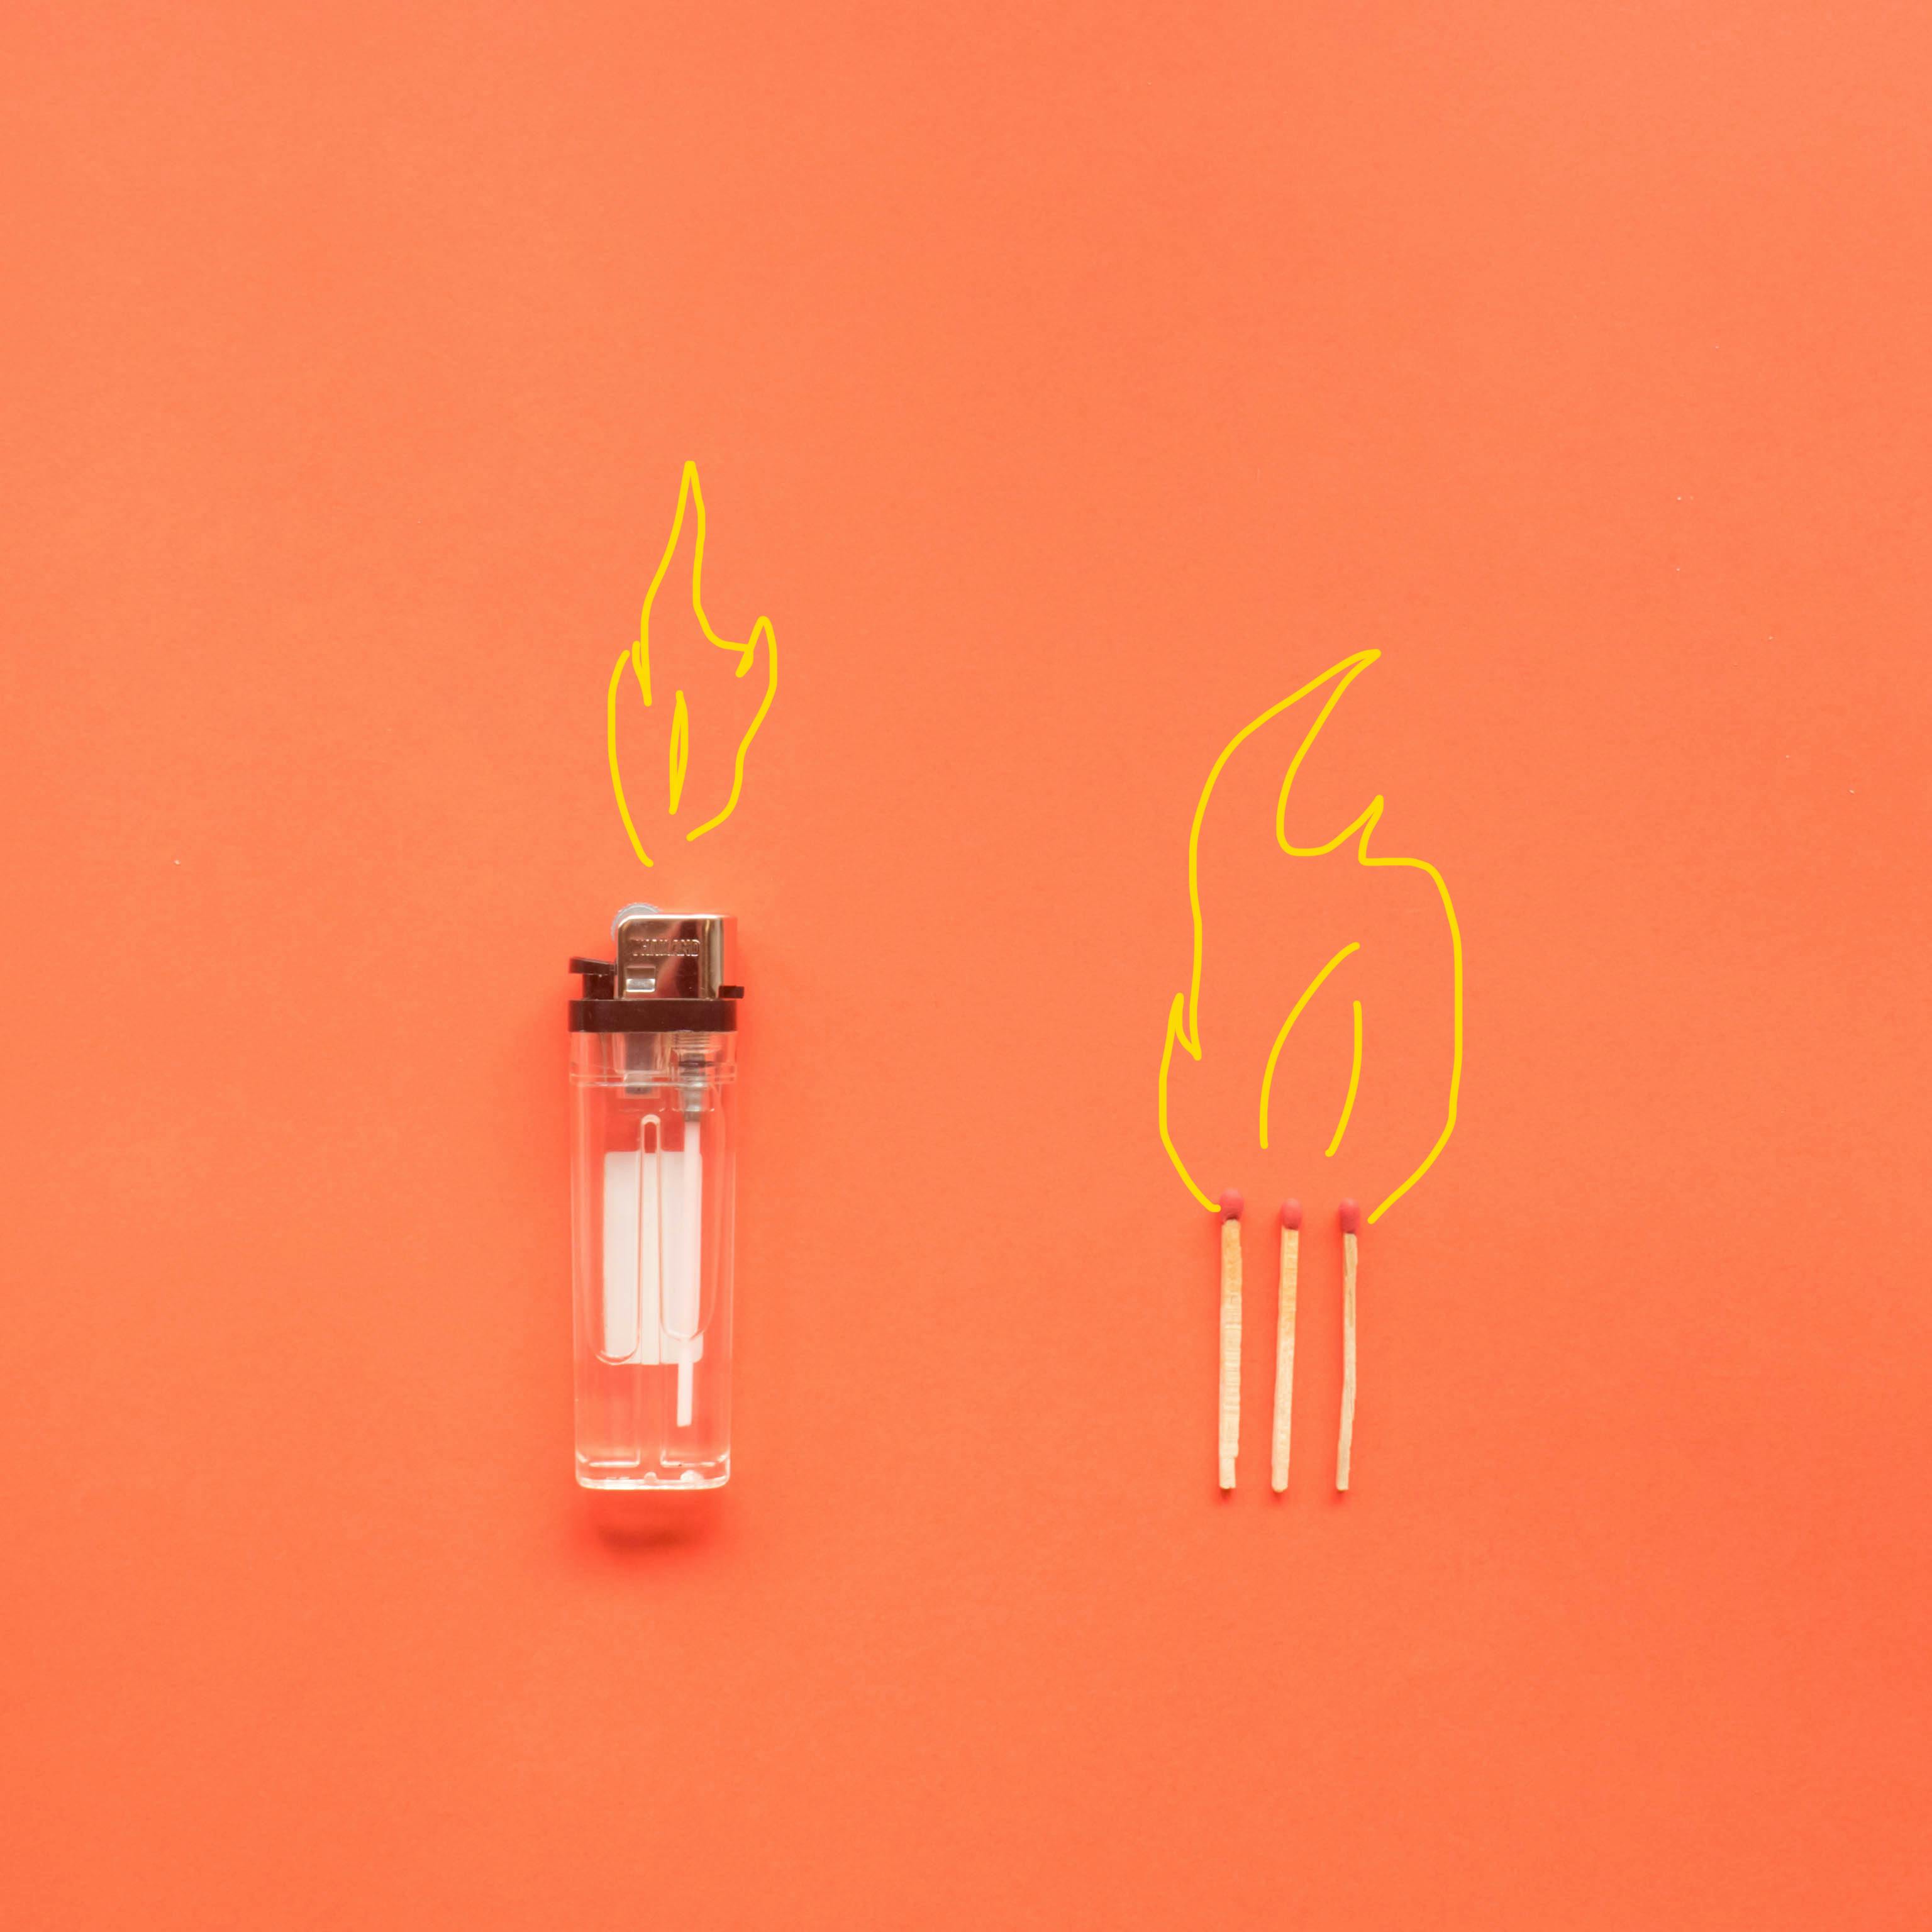 cigarette lighter and matches placed on orange background